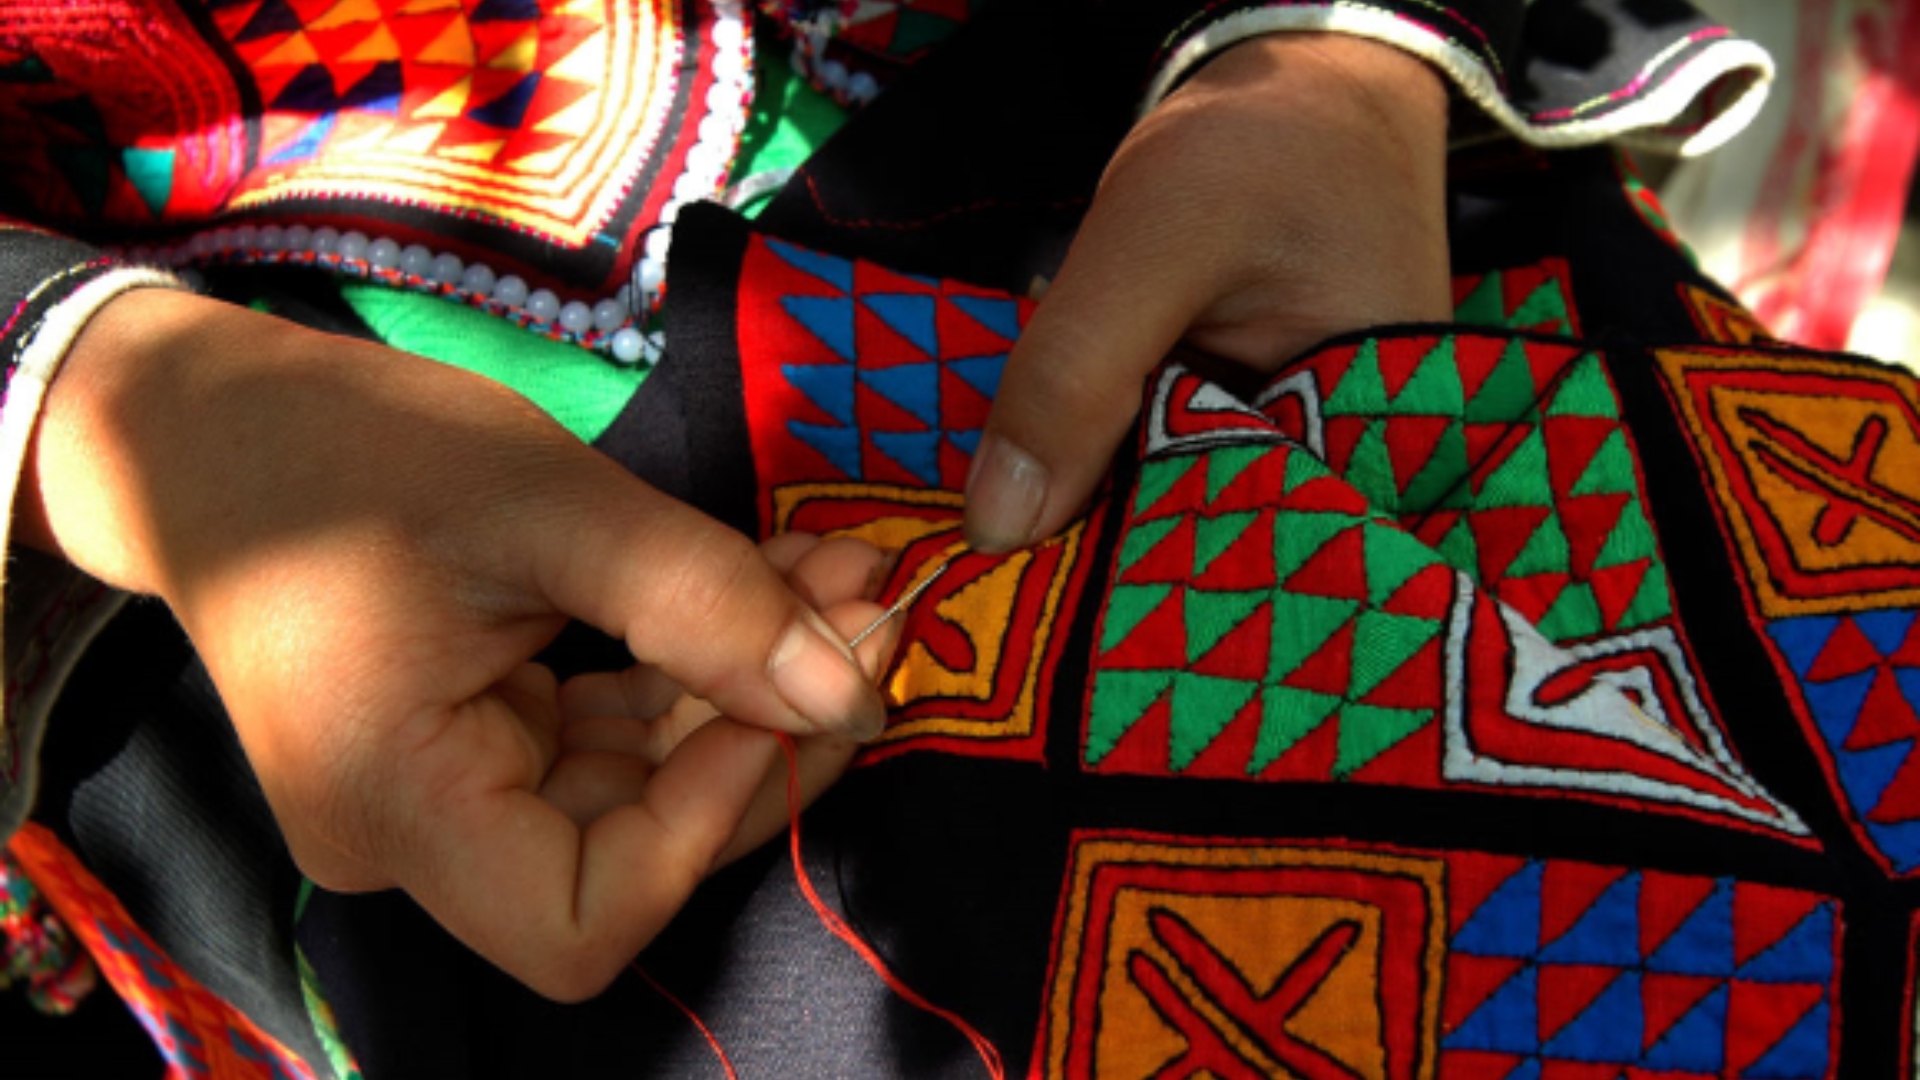 The intricate designs and patterns of ethnic clothes